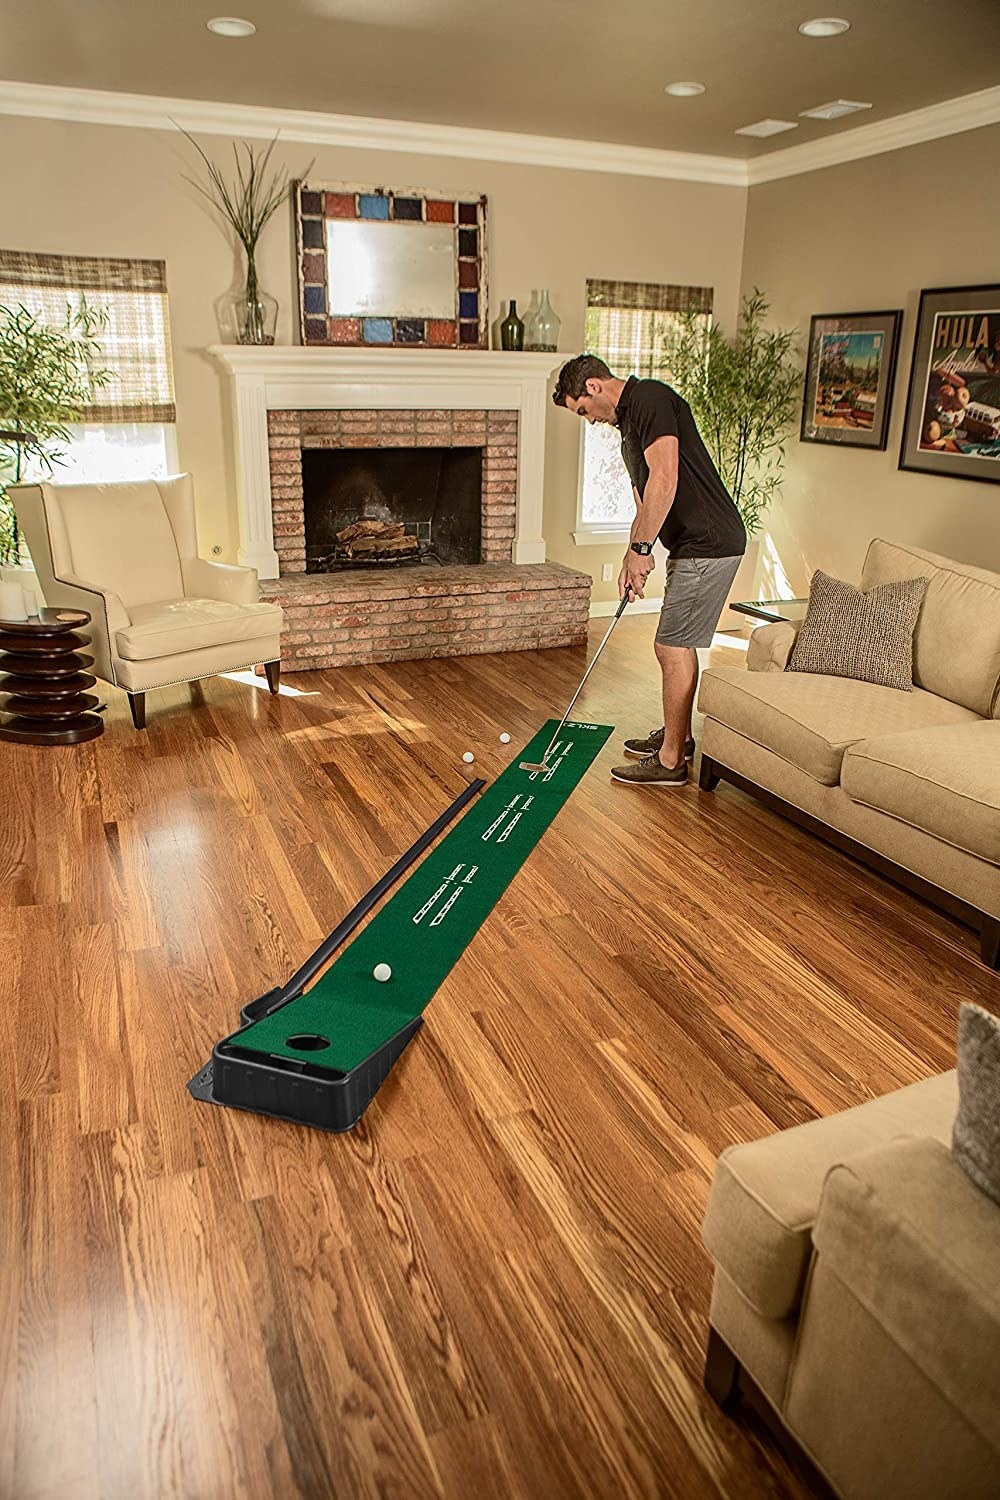 person in a living room using the indoor putt